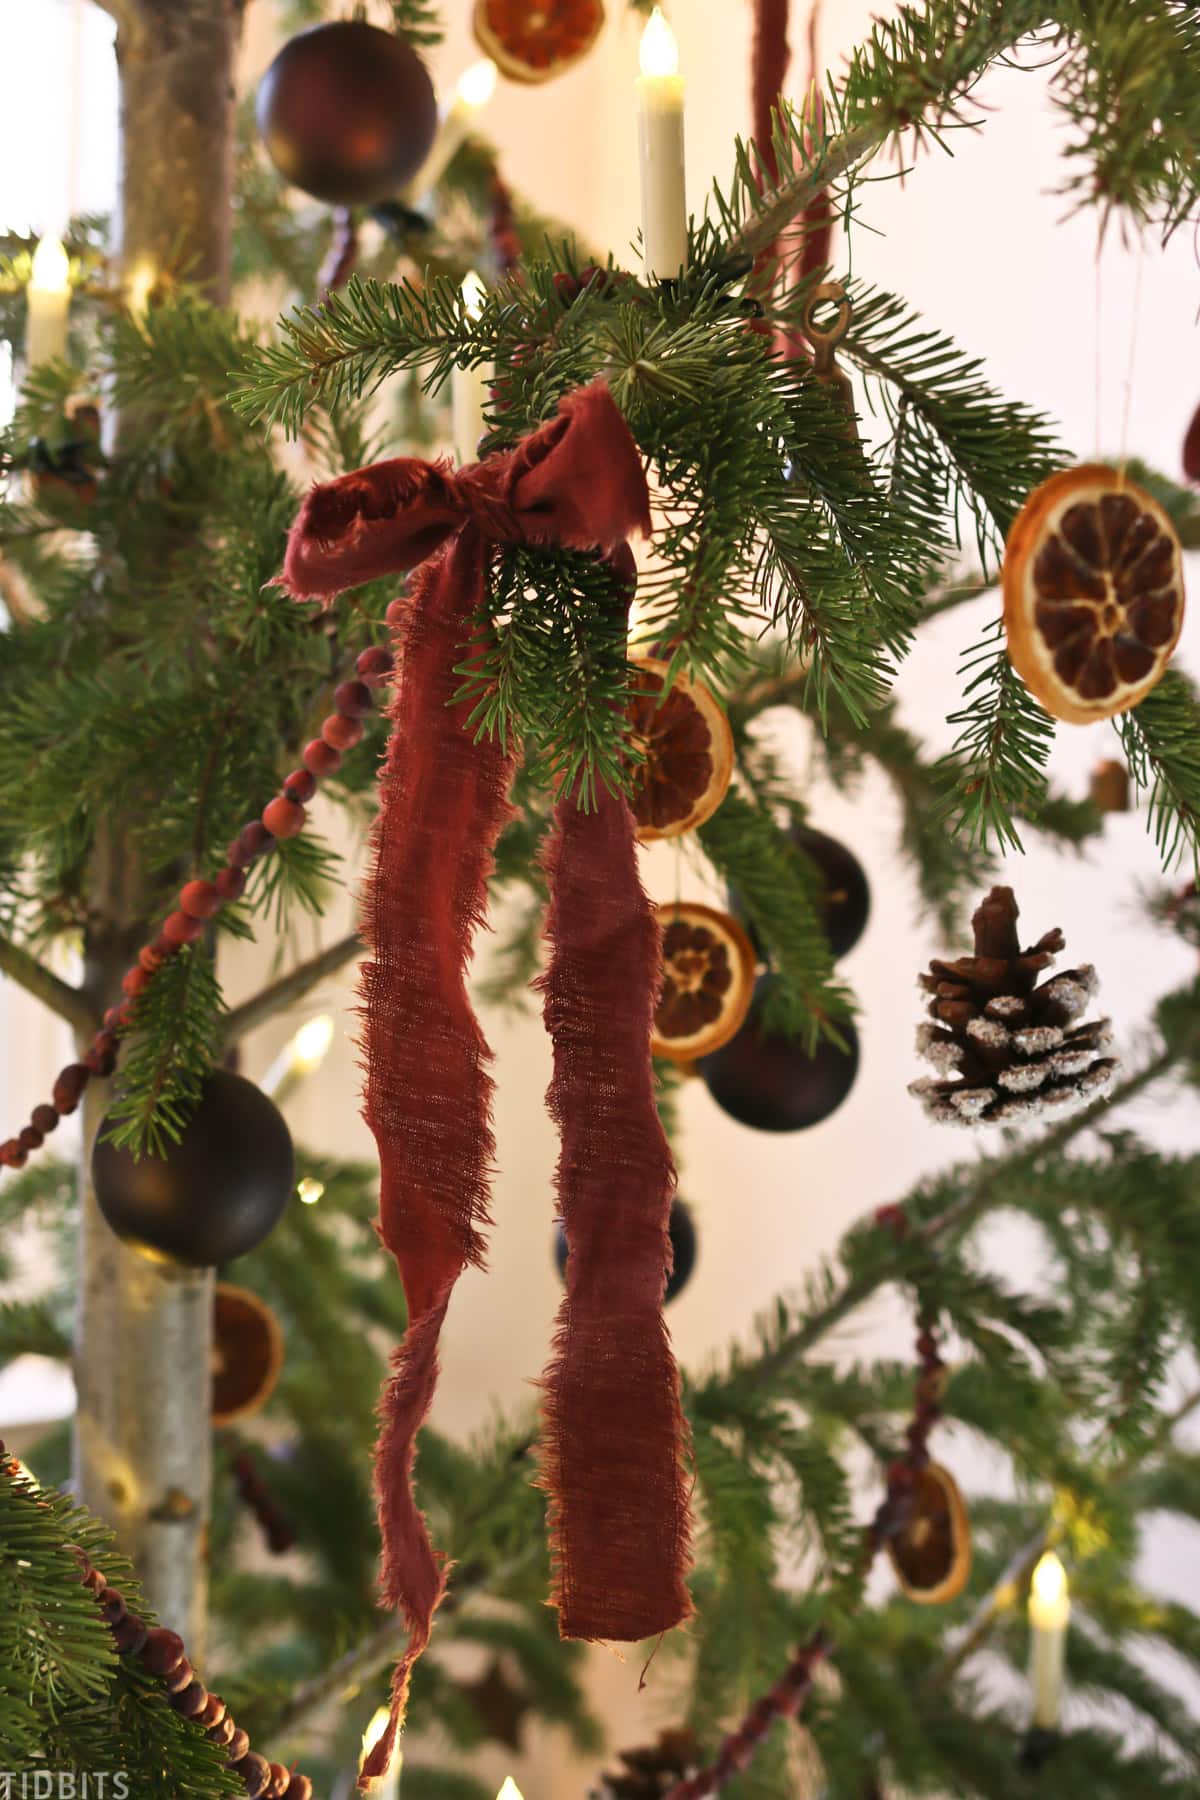 Red ribbon tied on Christmas tree with dried oranges, cranberry garland, and pinecones